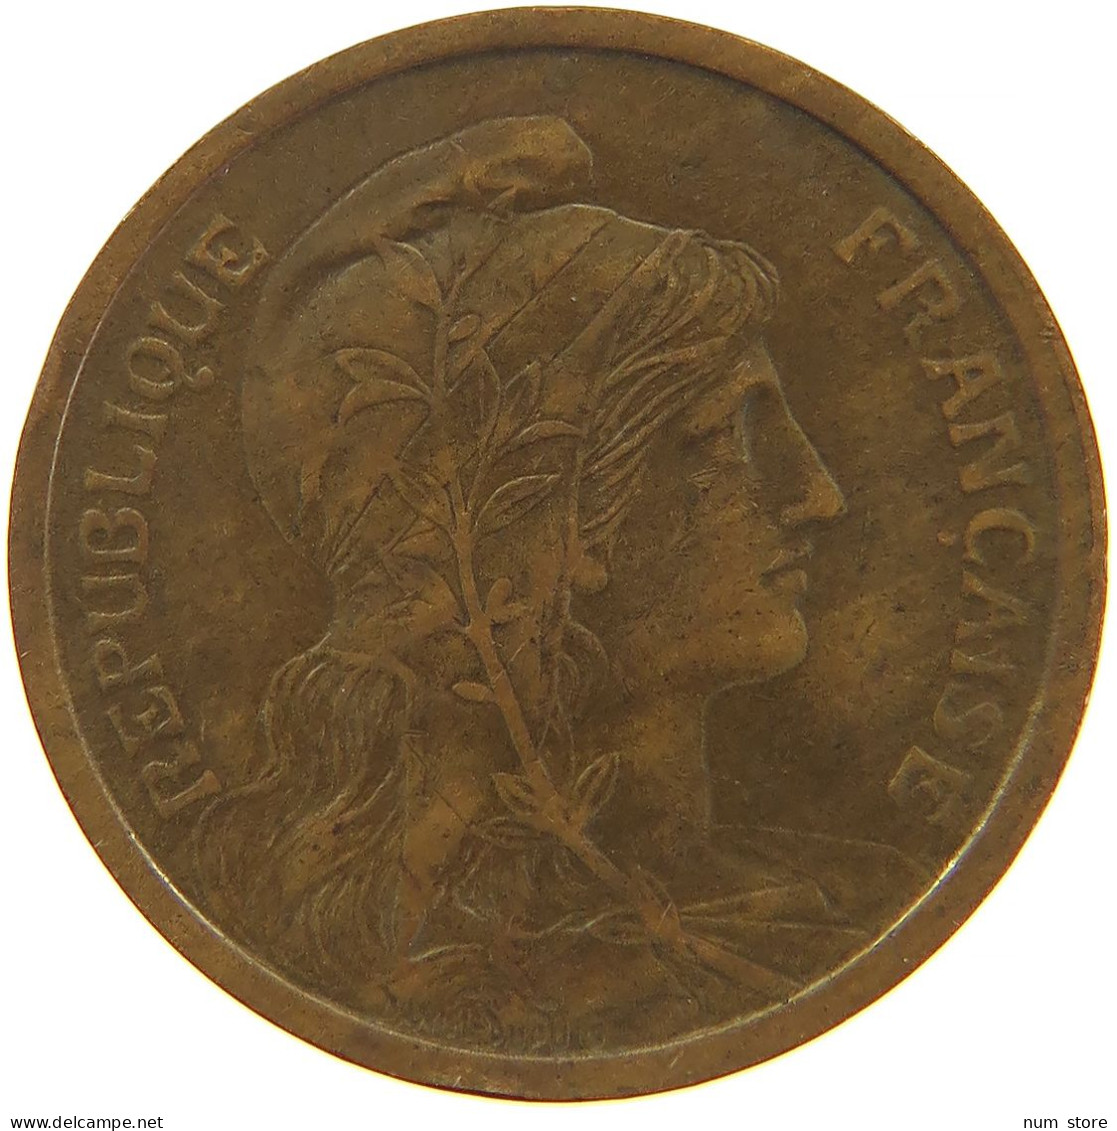 FRANCE 2 CENTIMES 1914 #s083 0319 - 2 Centimes